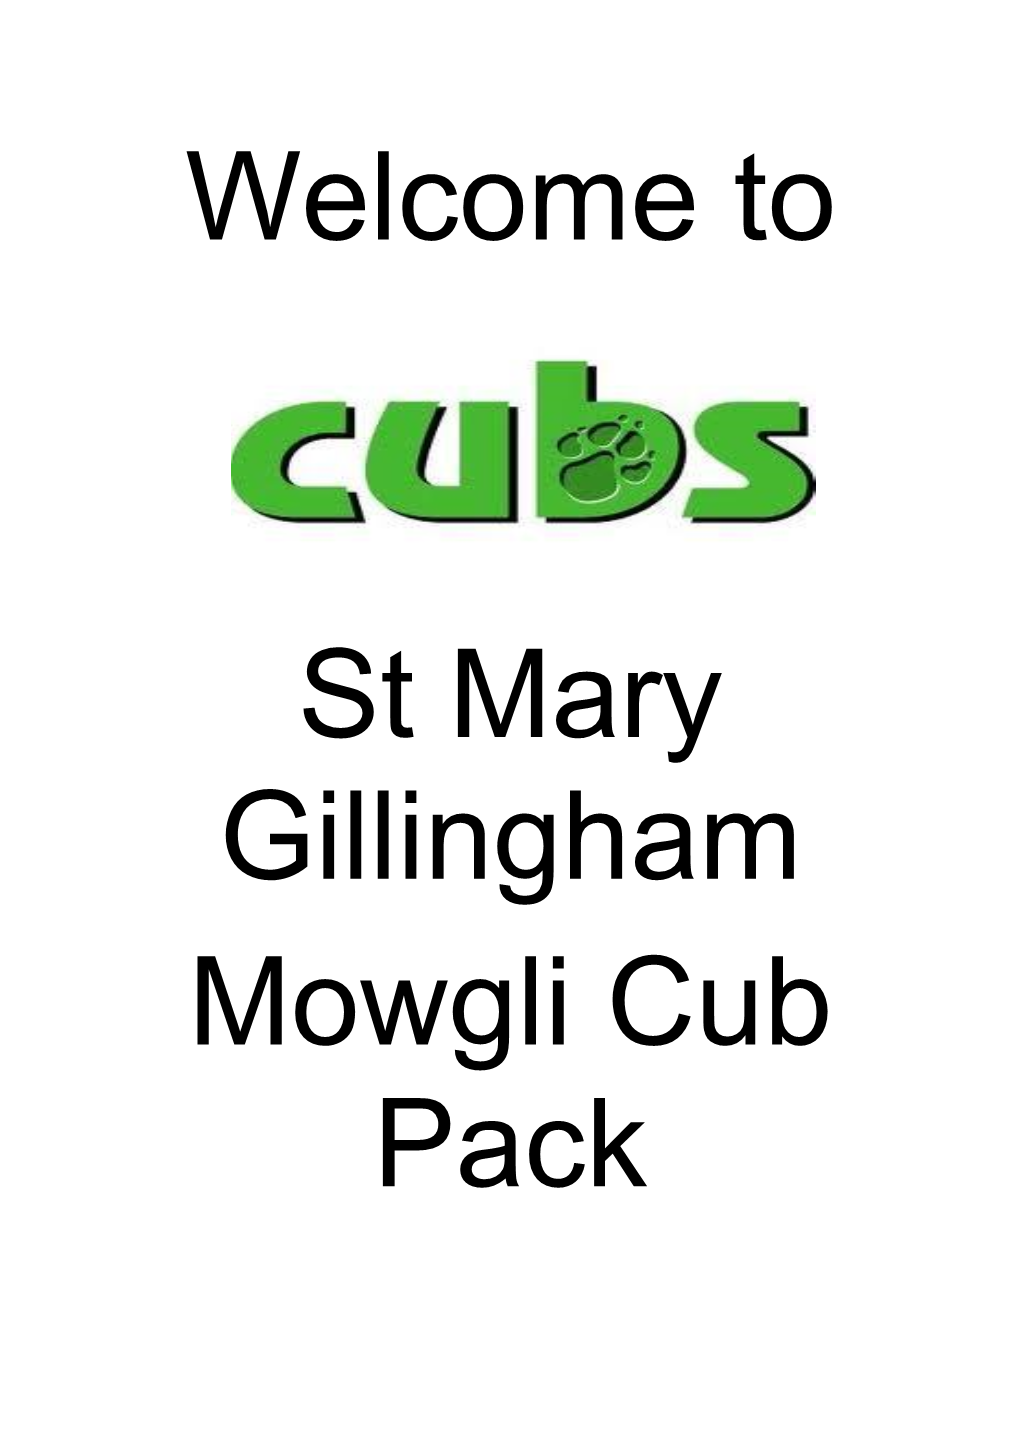 Welcome to St Mary Gillingham Mowgli Cub Pack